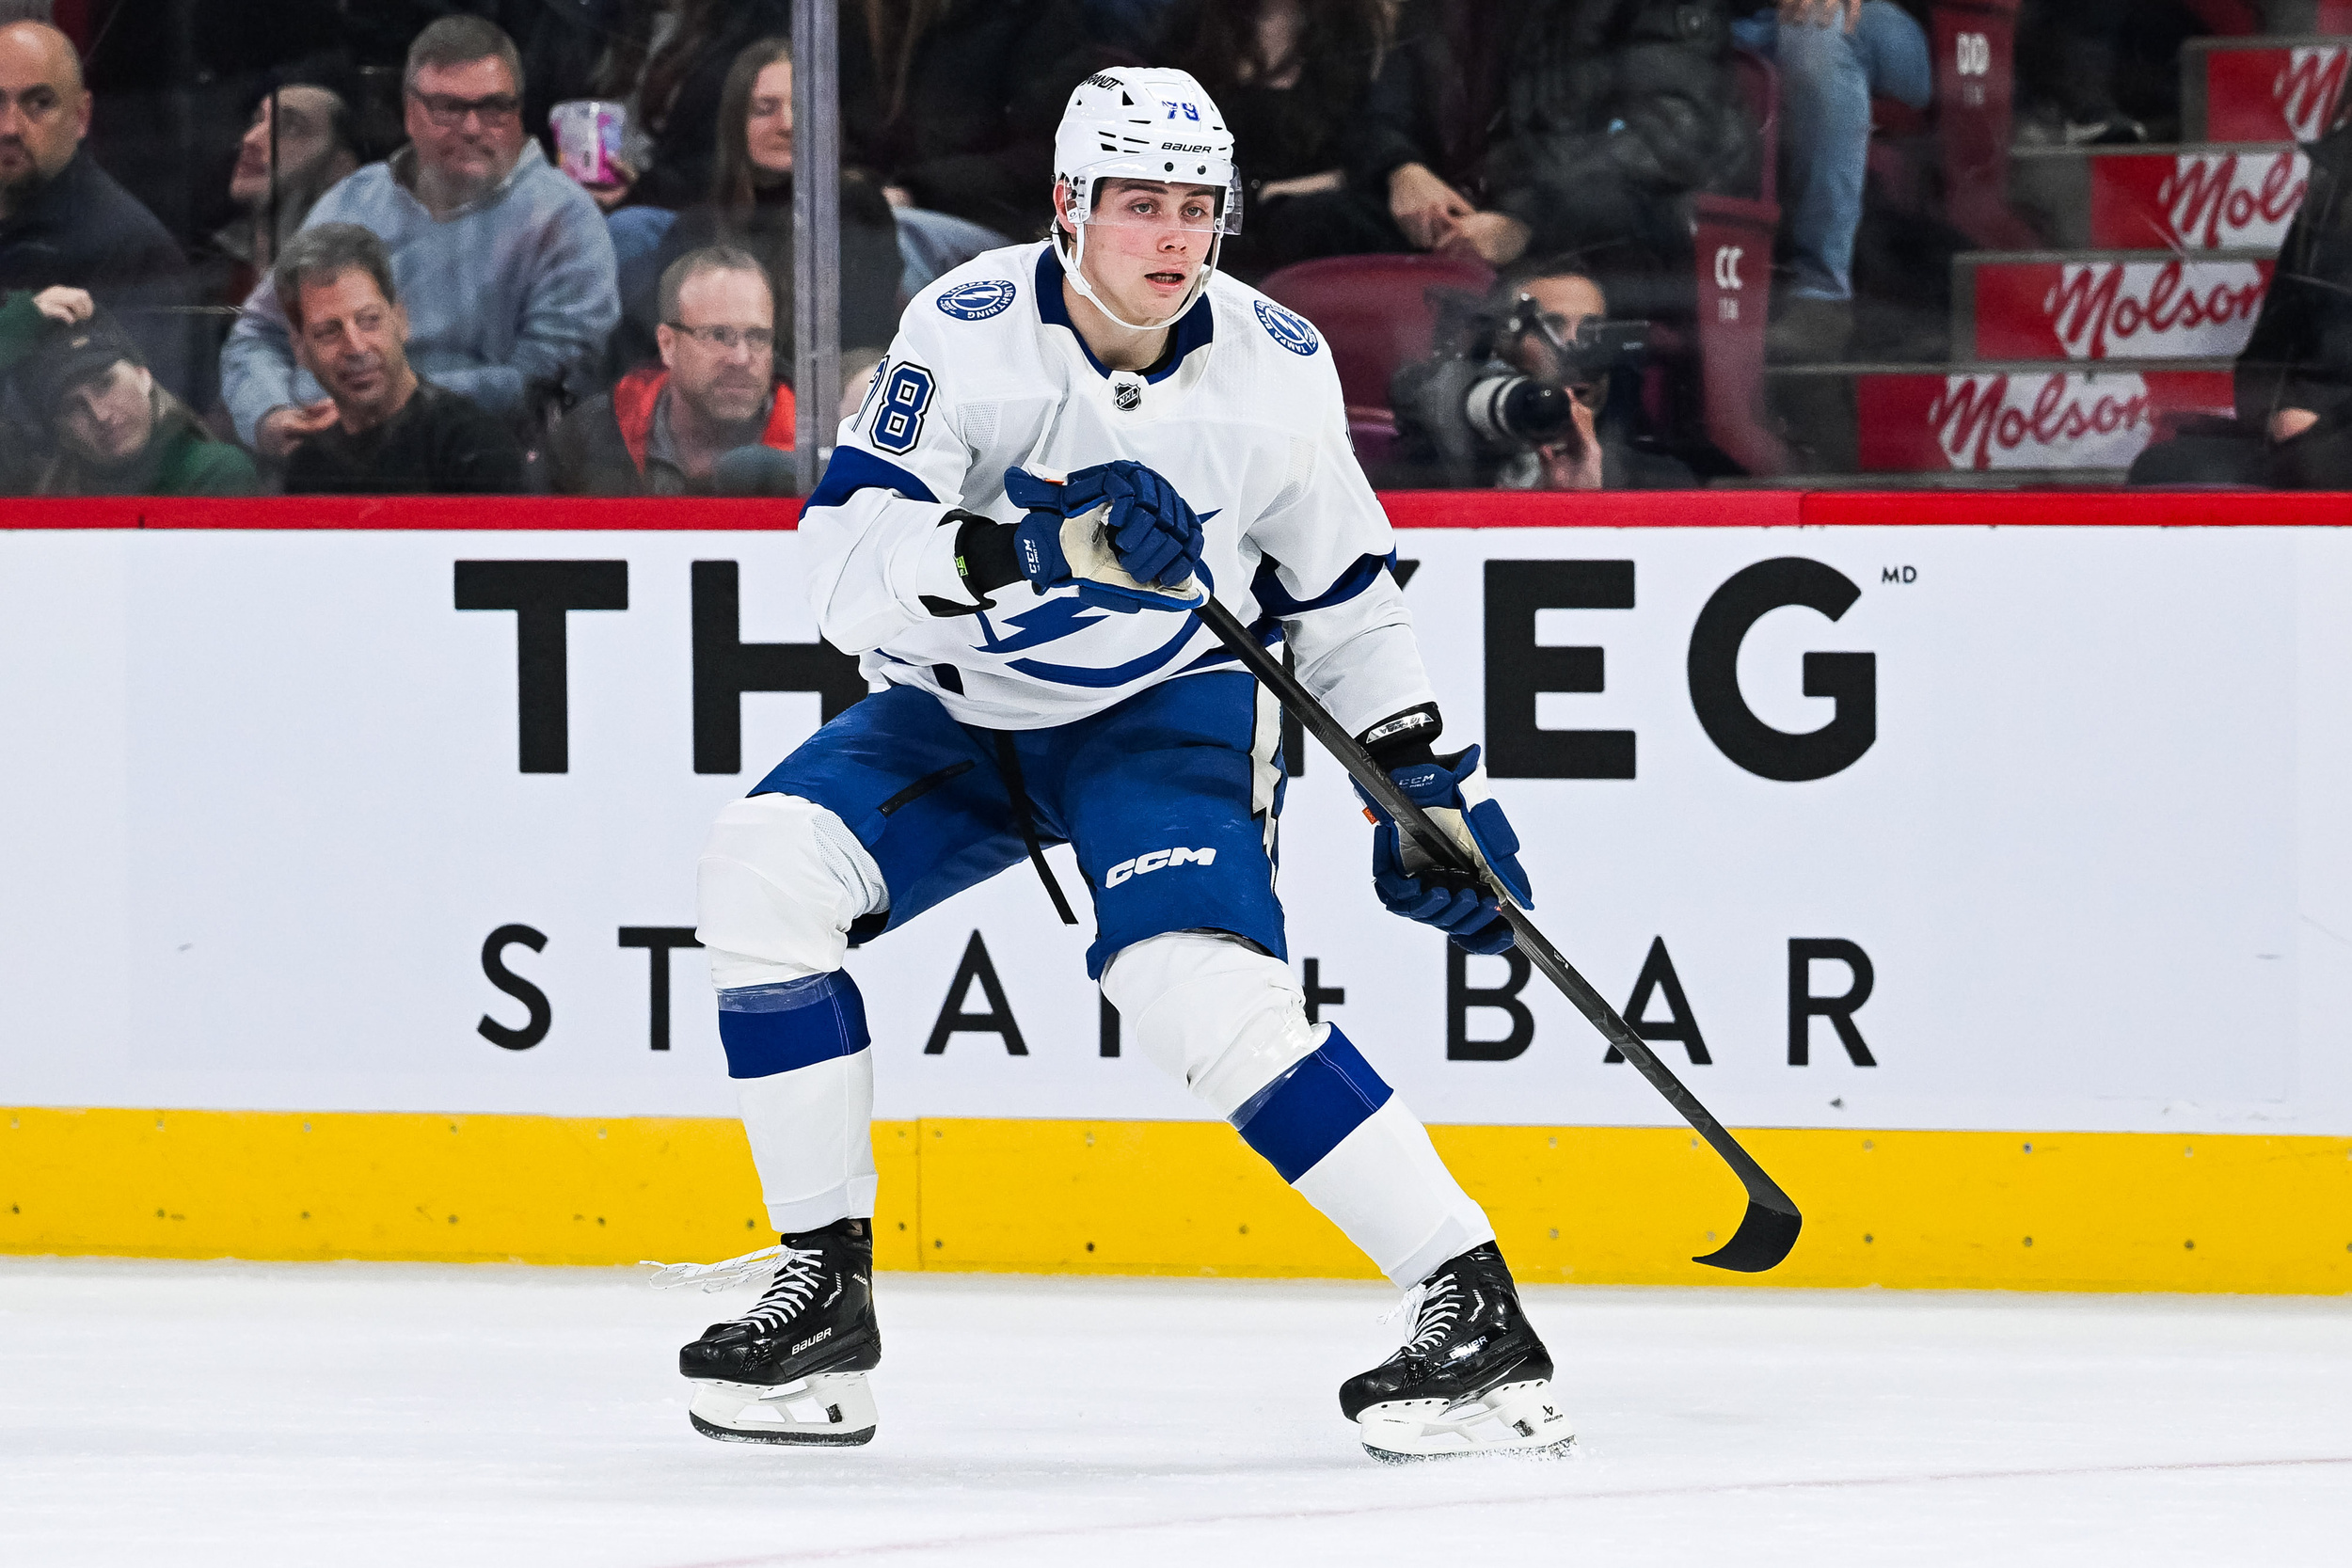 lightning assign three players to ahl after getting eliminated in playoffs